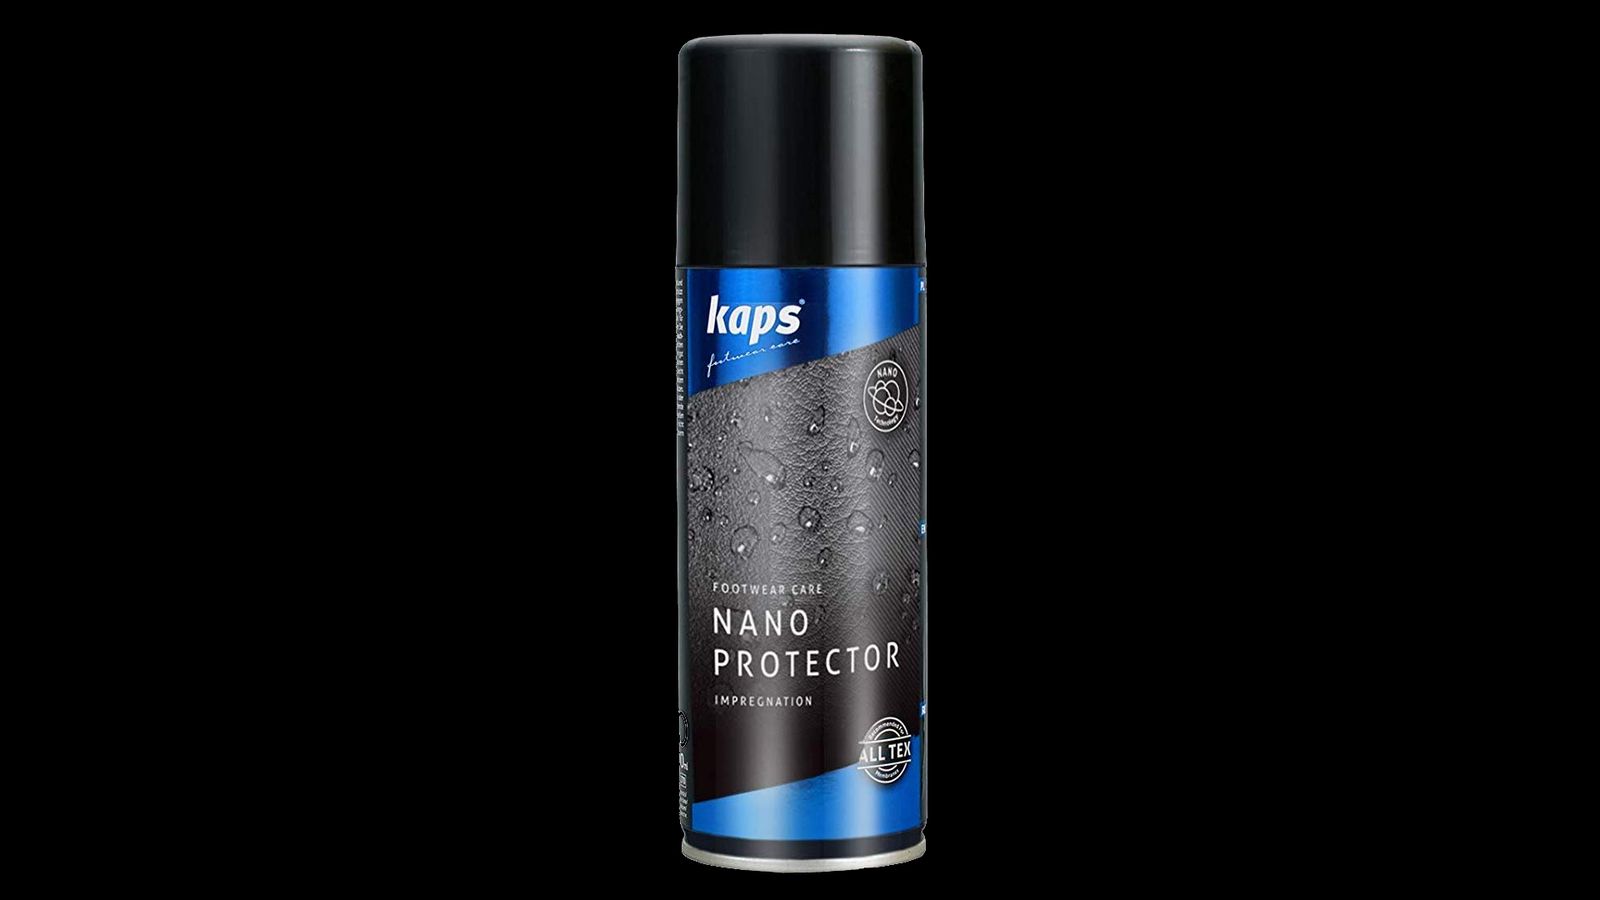 Kaps Nano Protector product image of a black and blue can.